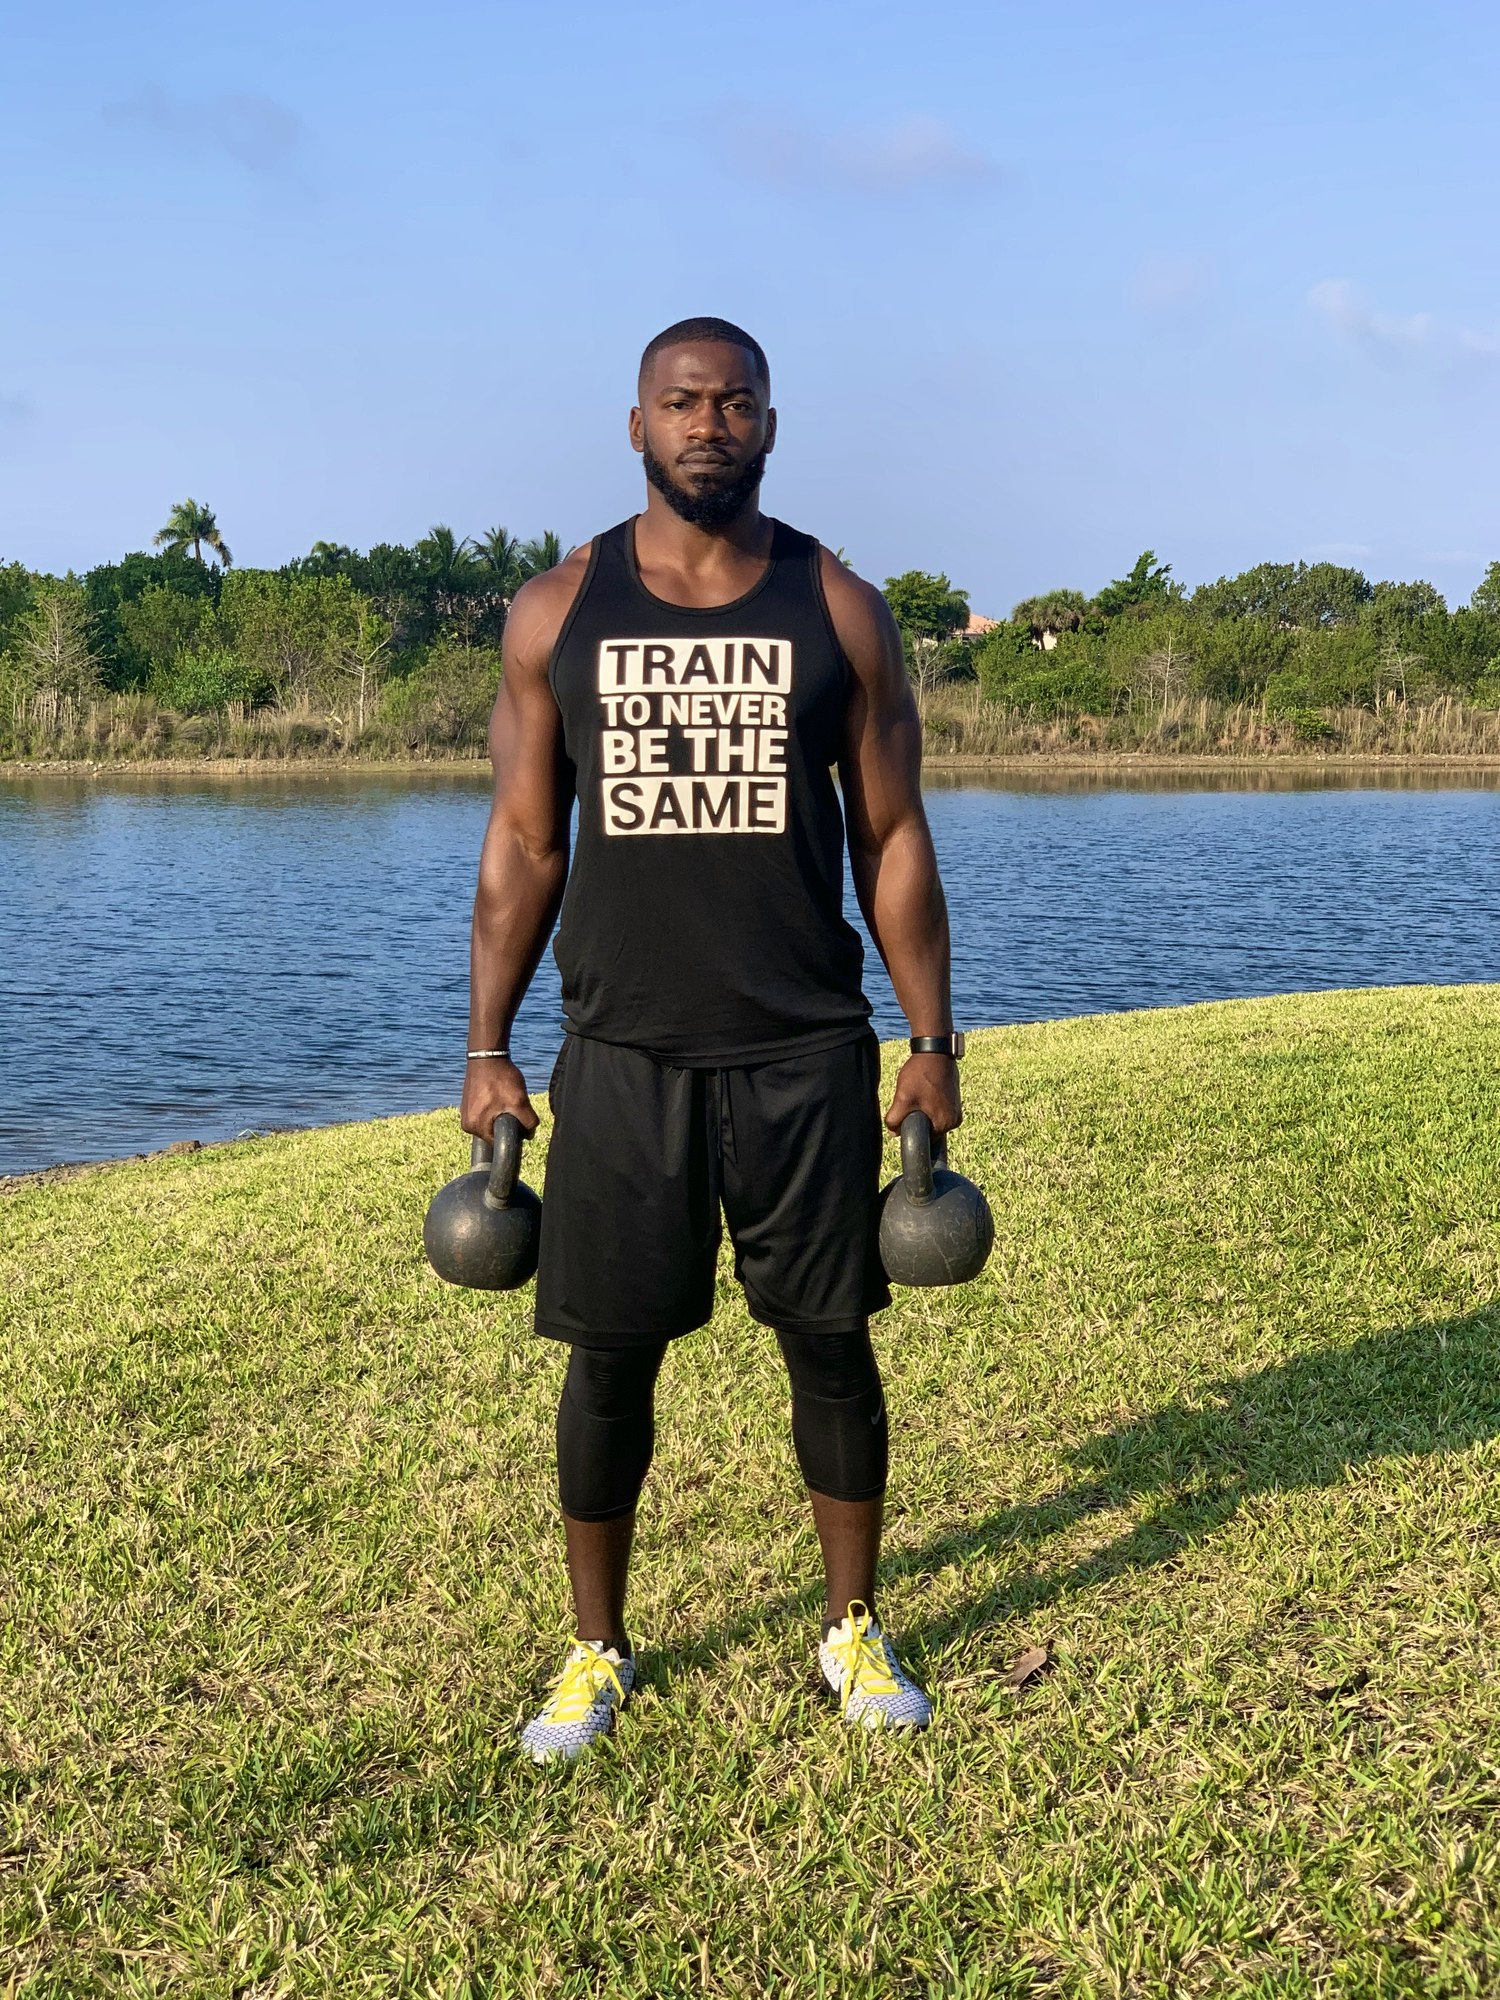 Steven W. Personal Trainer in Pembroke Pines, FL with